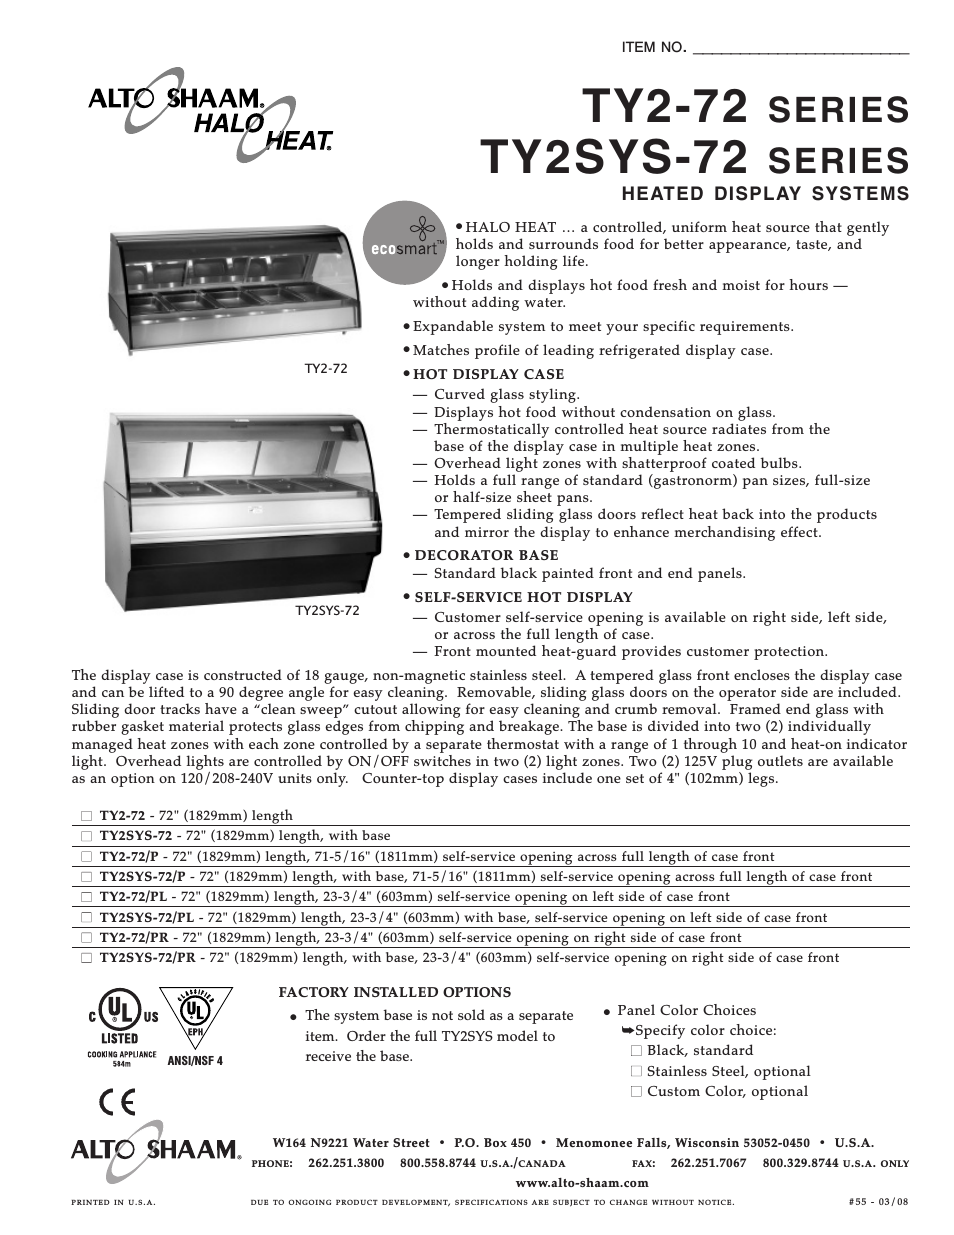 TY2SYS-72